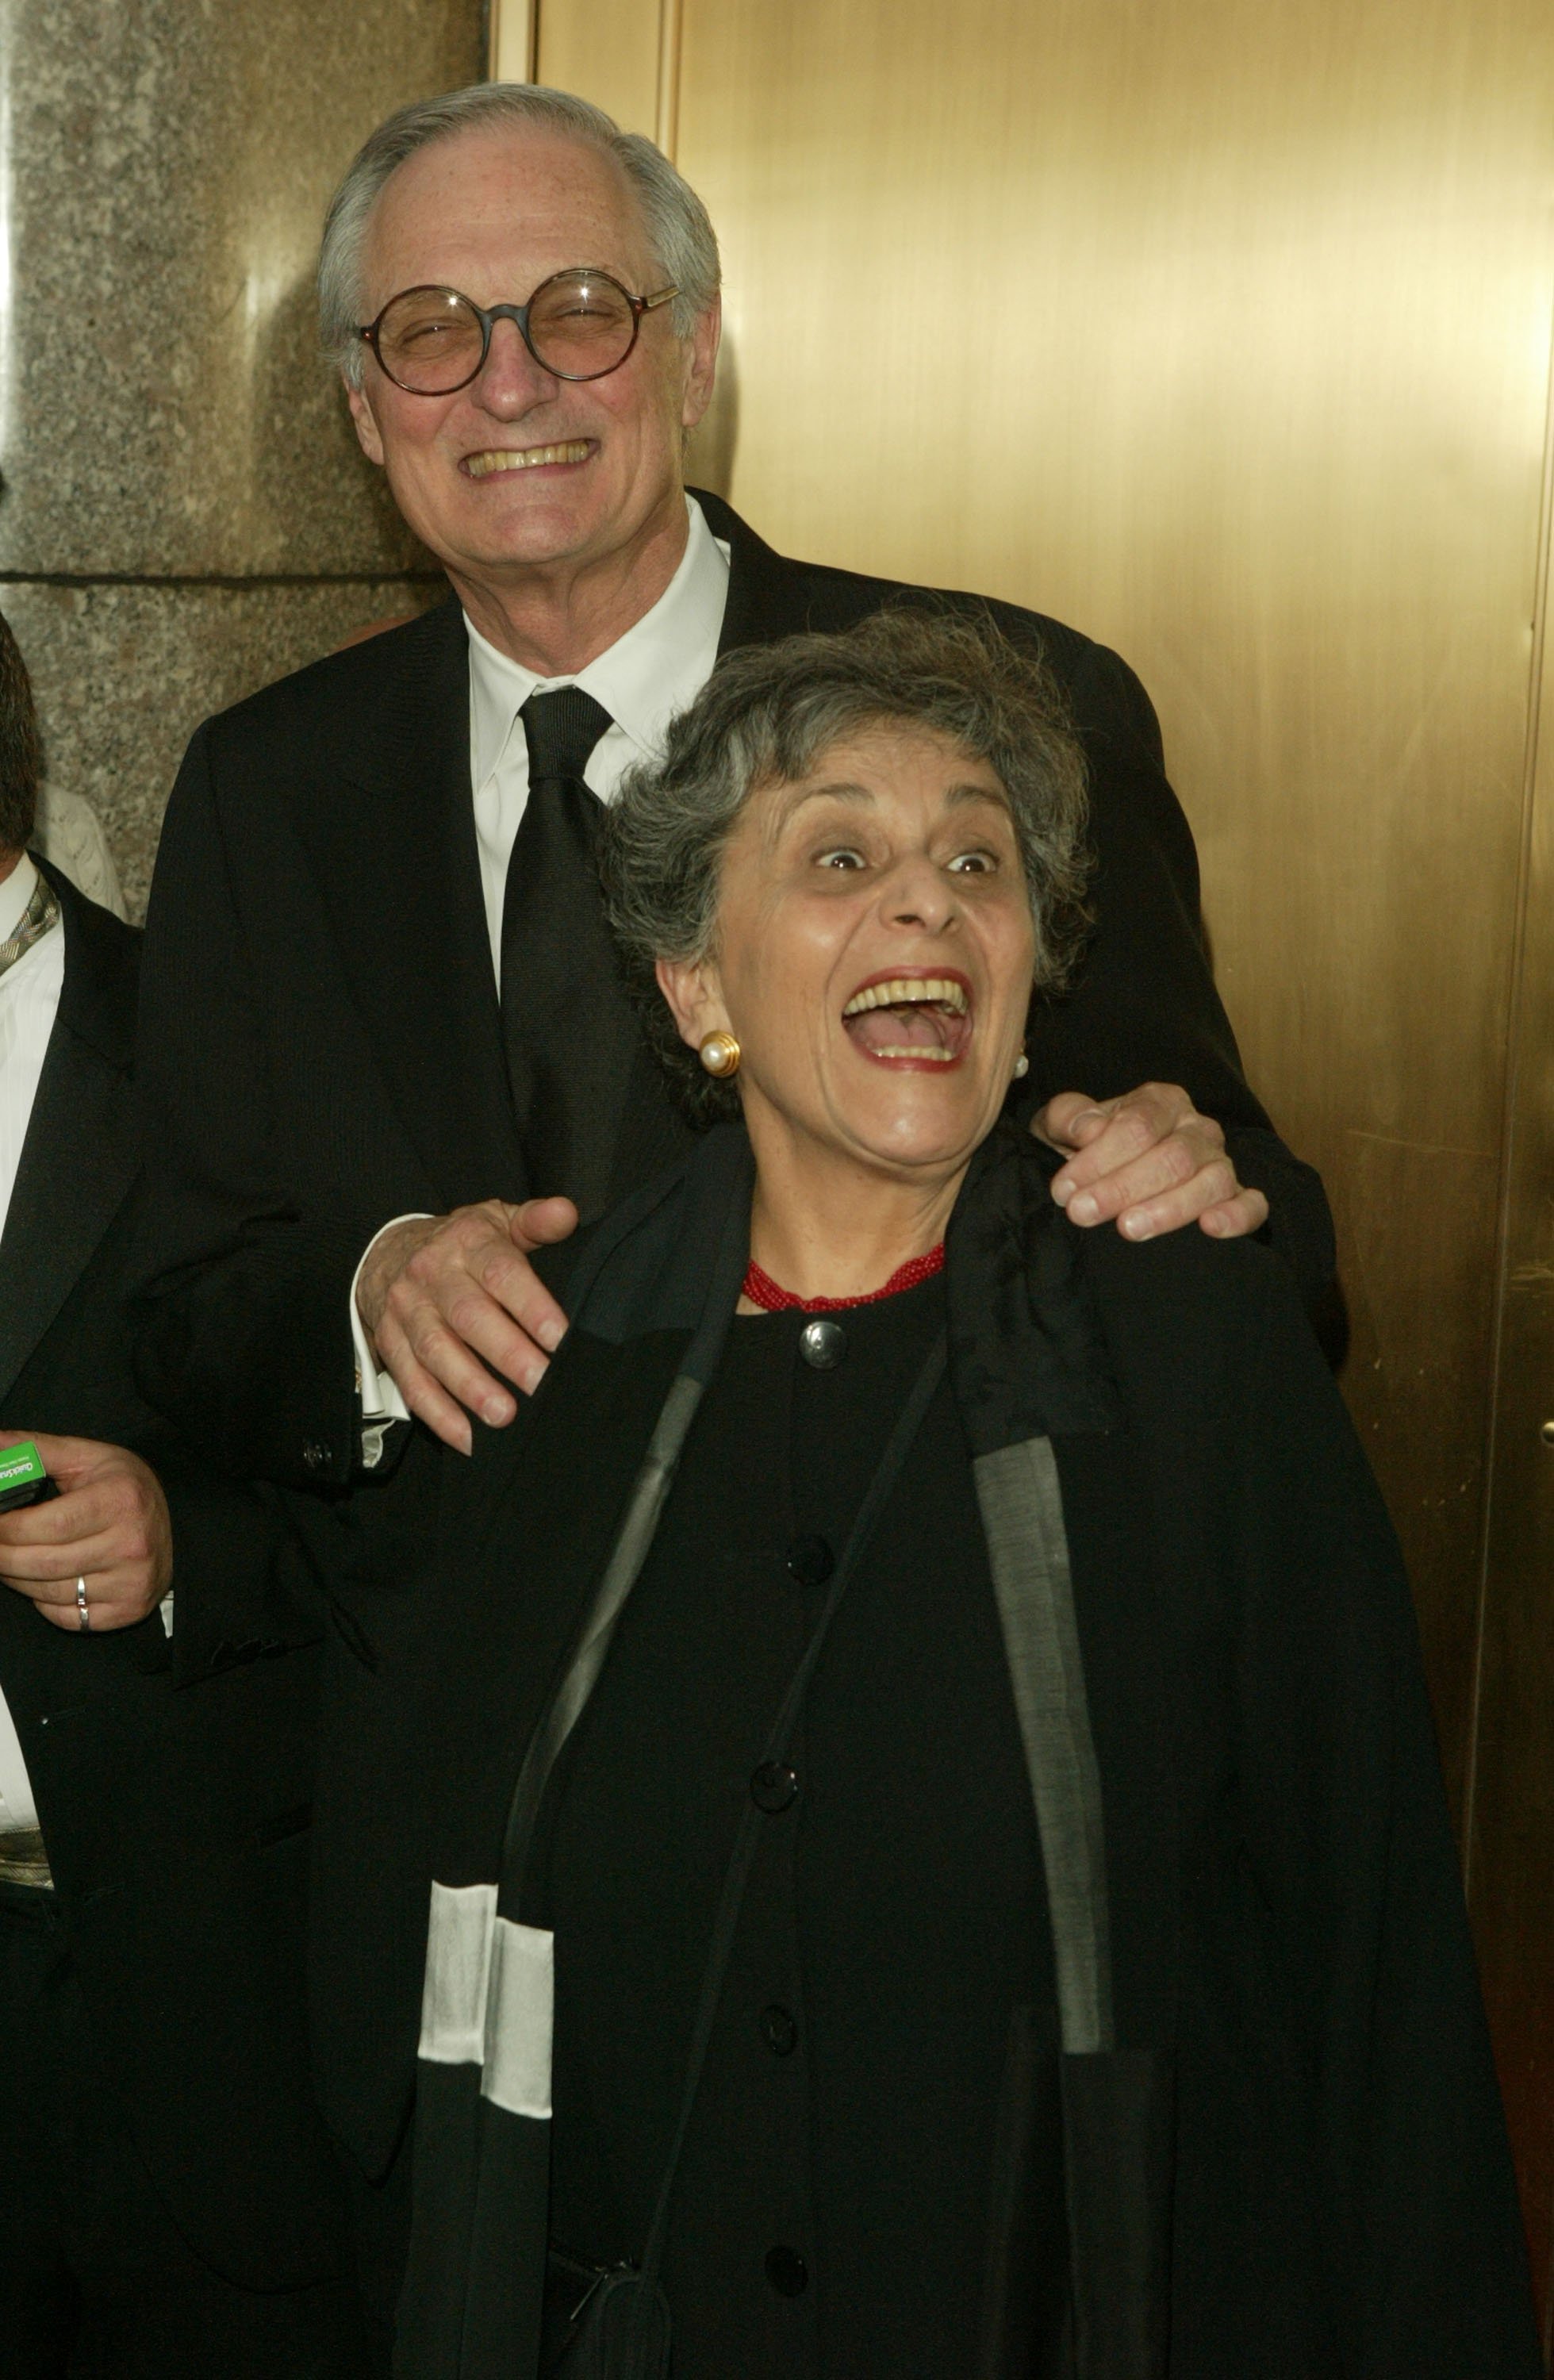 Alan Alda and his wife Arlene Alda at the 59th Annual Tony Awards on June 5, 2005 in New York City | Photo: Getty Images